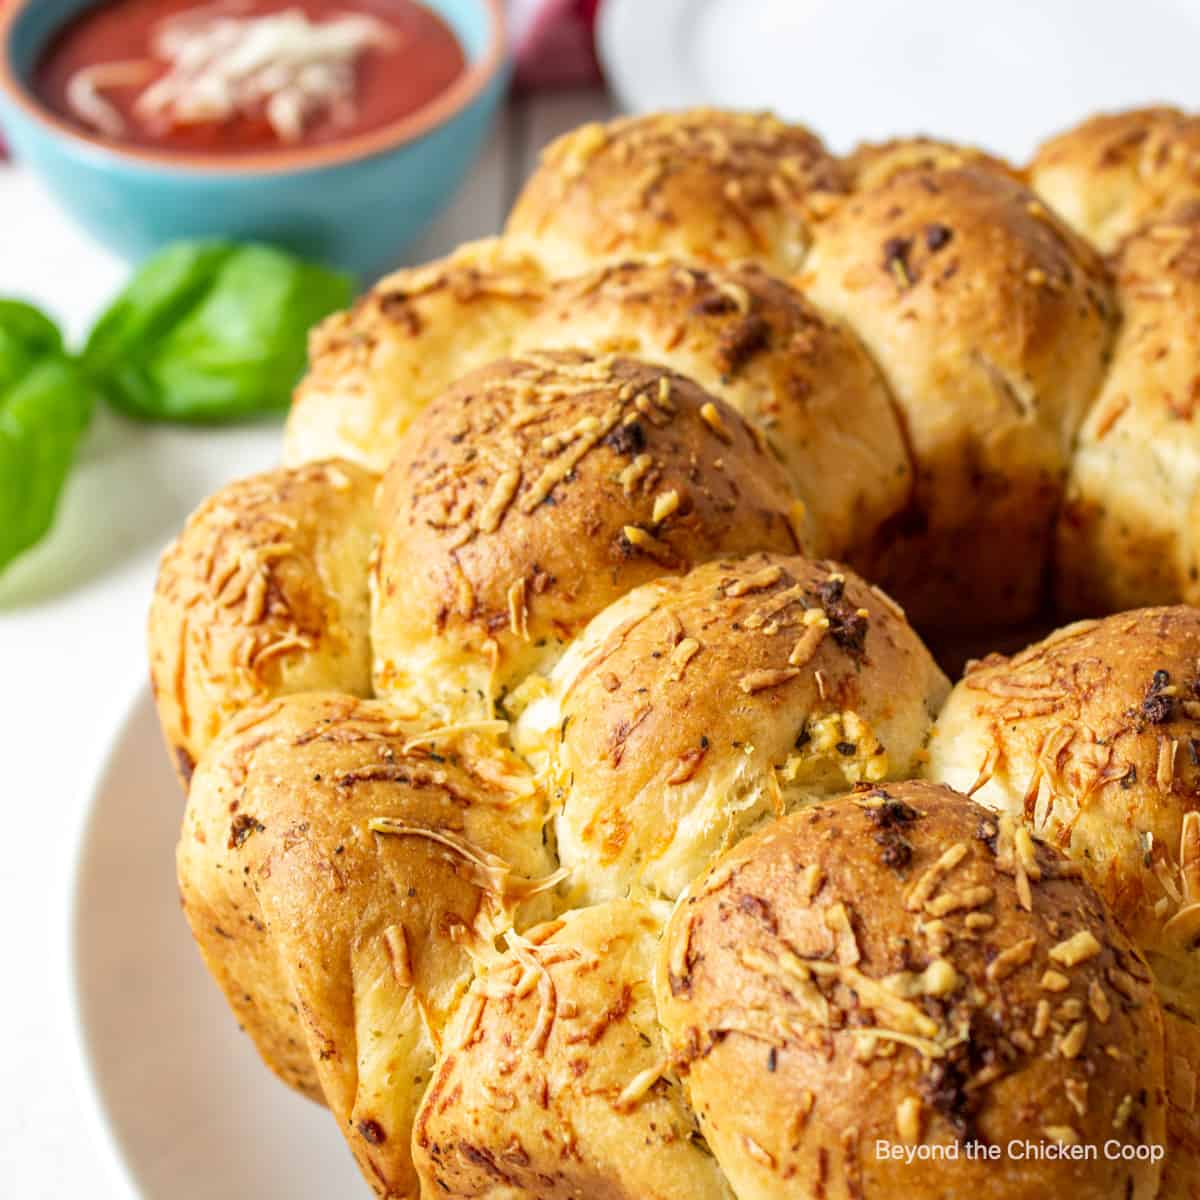 A round loaf of bread sprinkled with parmesan cheese.